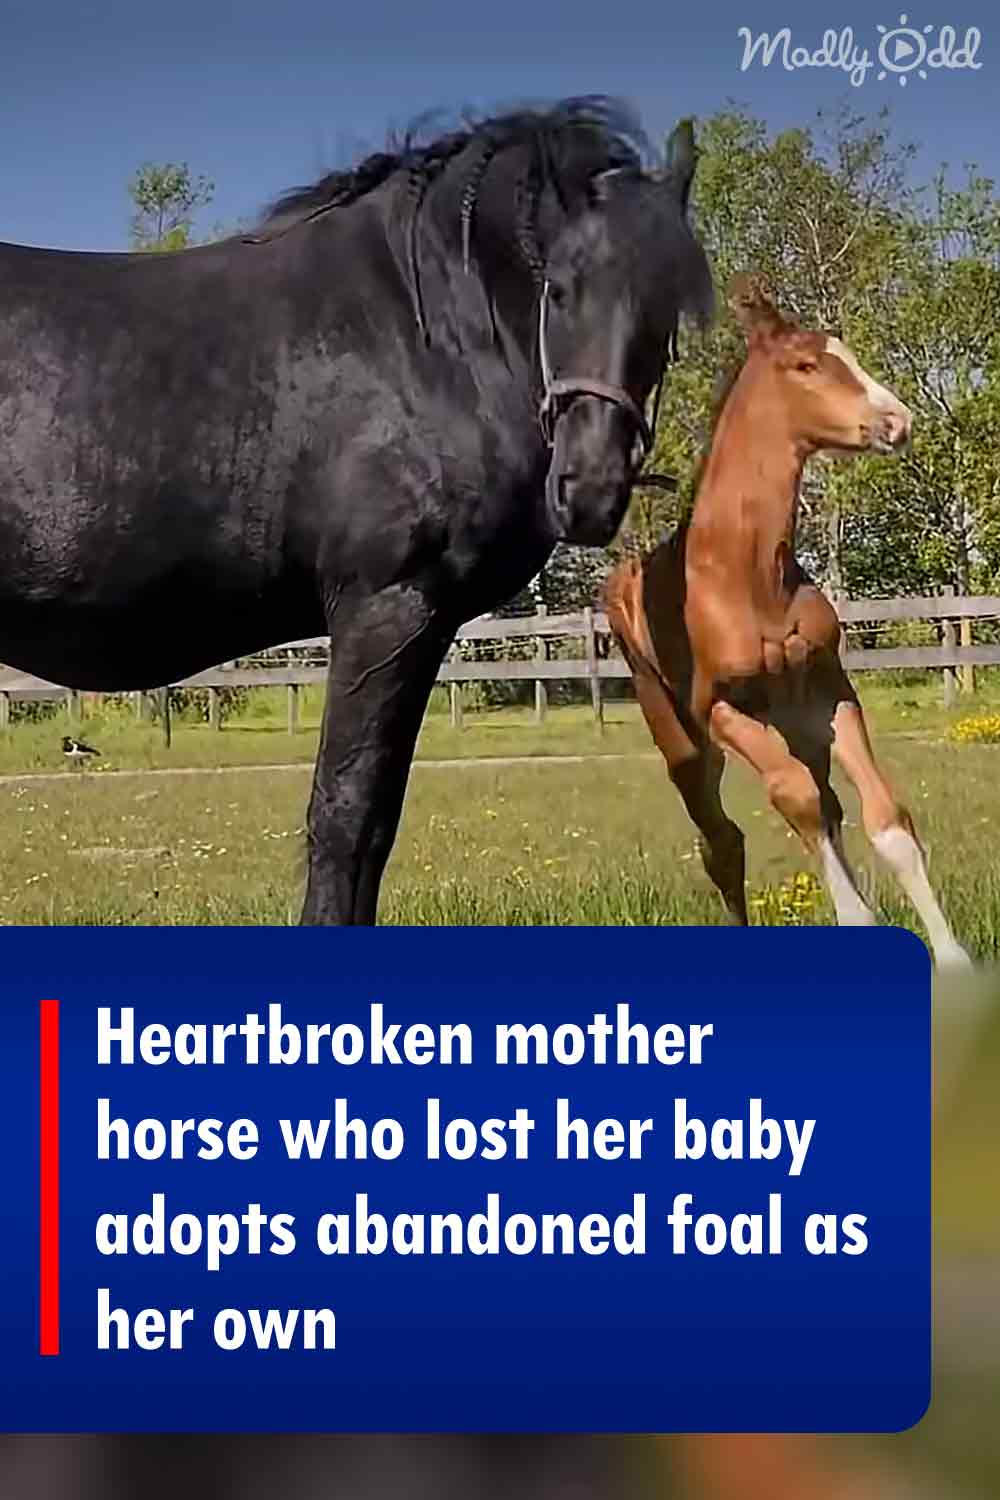 Heartbroken mother horse who lost her baby adopts abandoned foal as her own